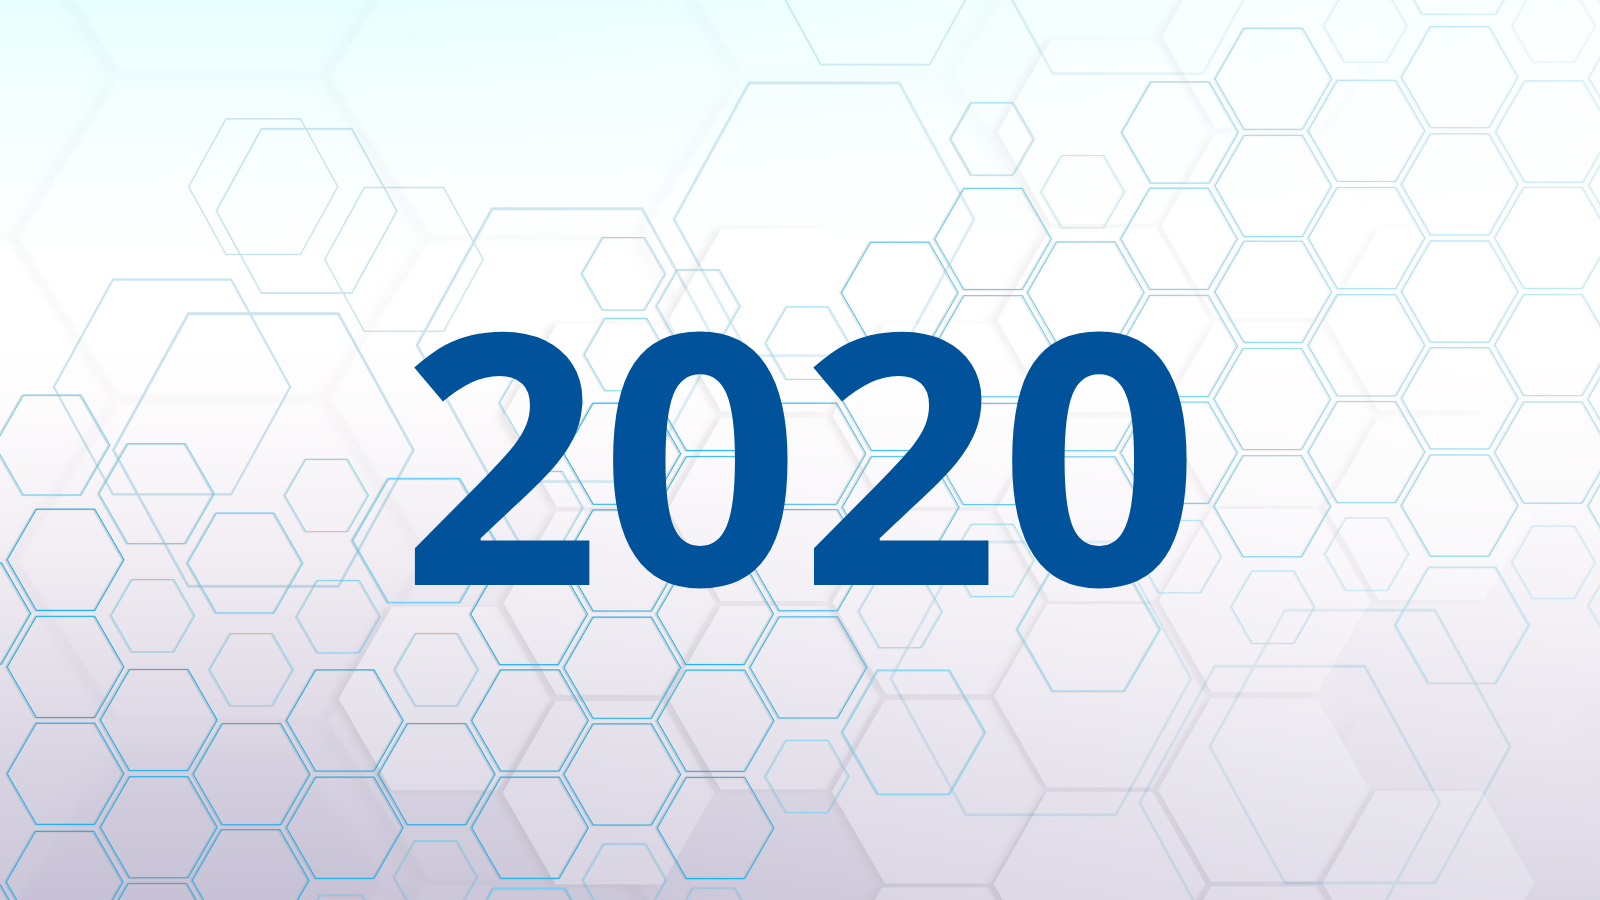 Light grey background with "2020" in dark blue font